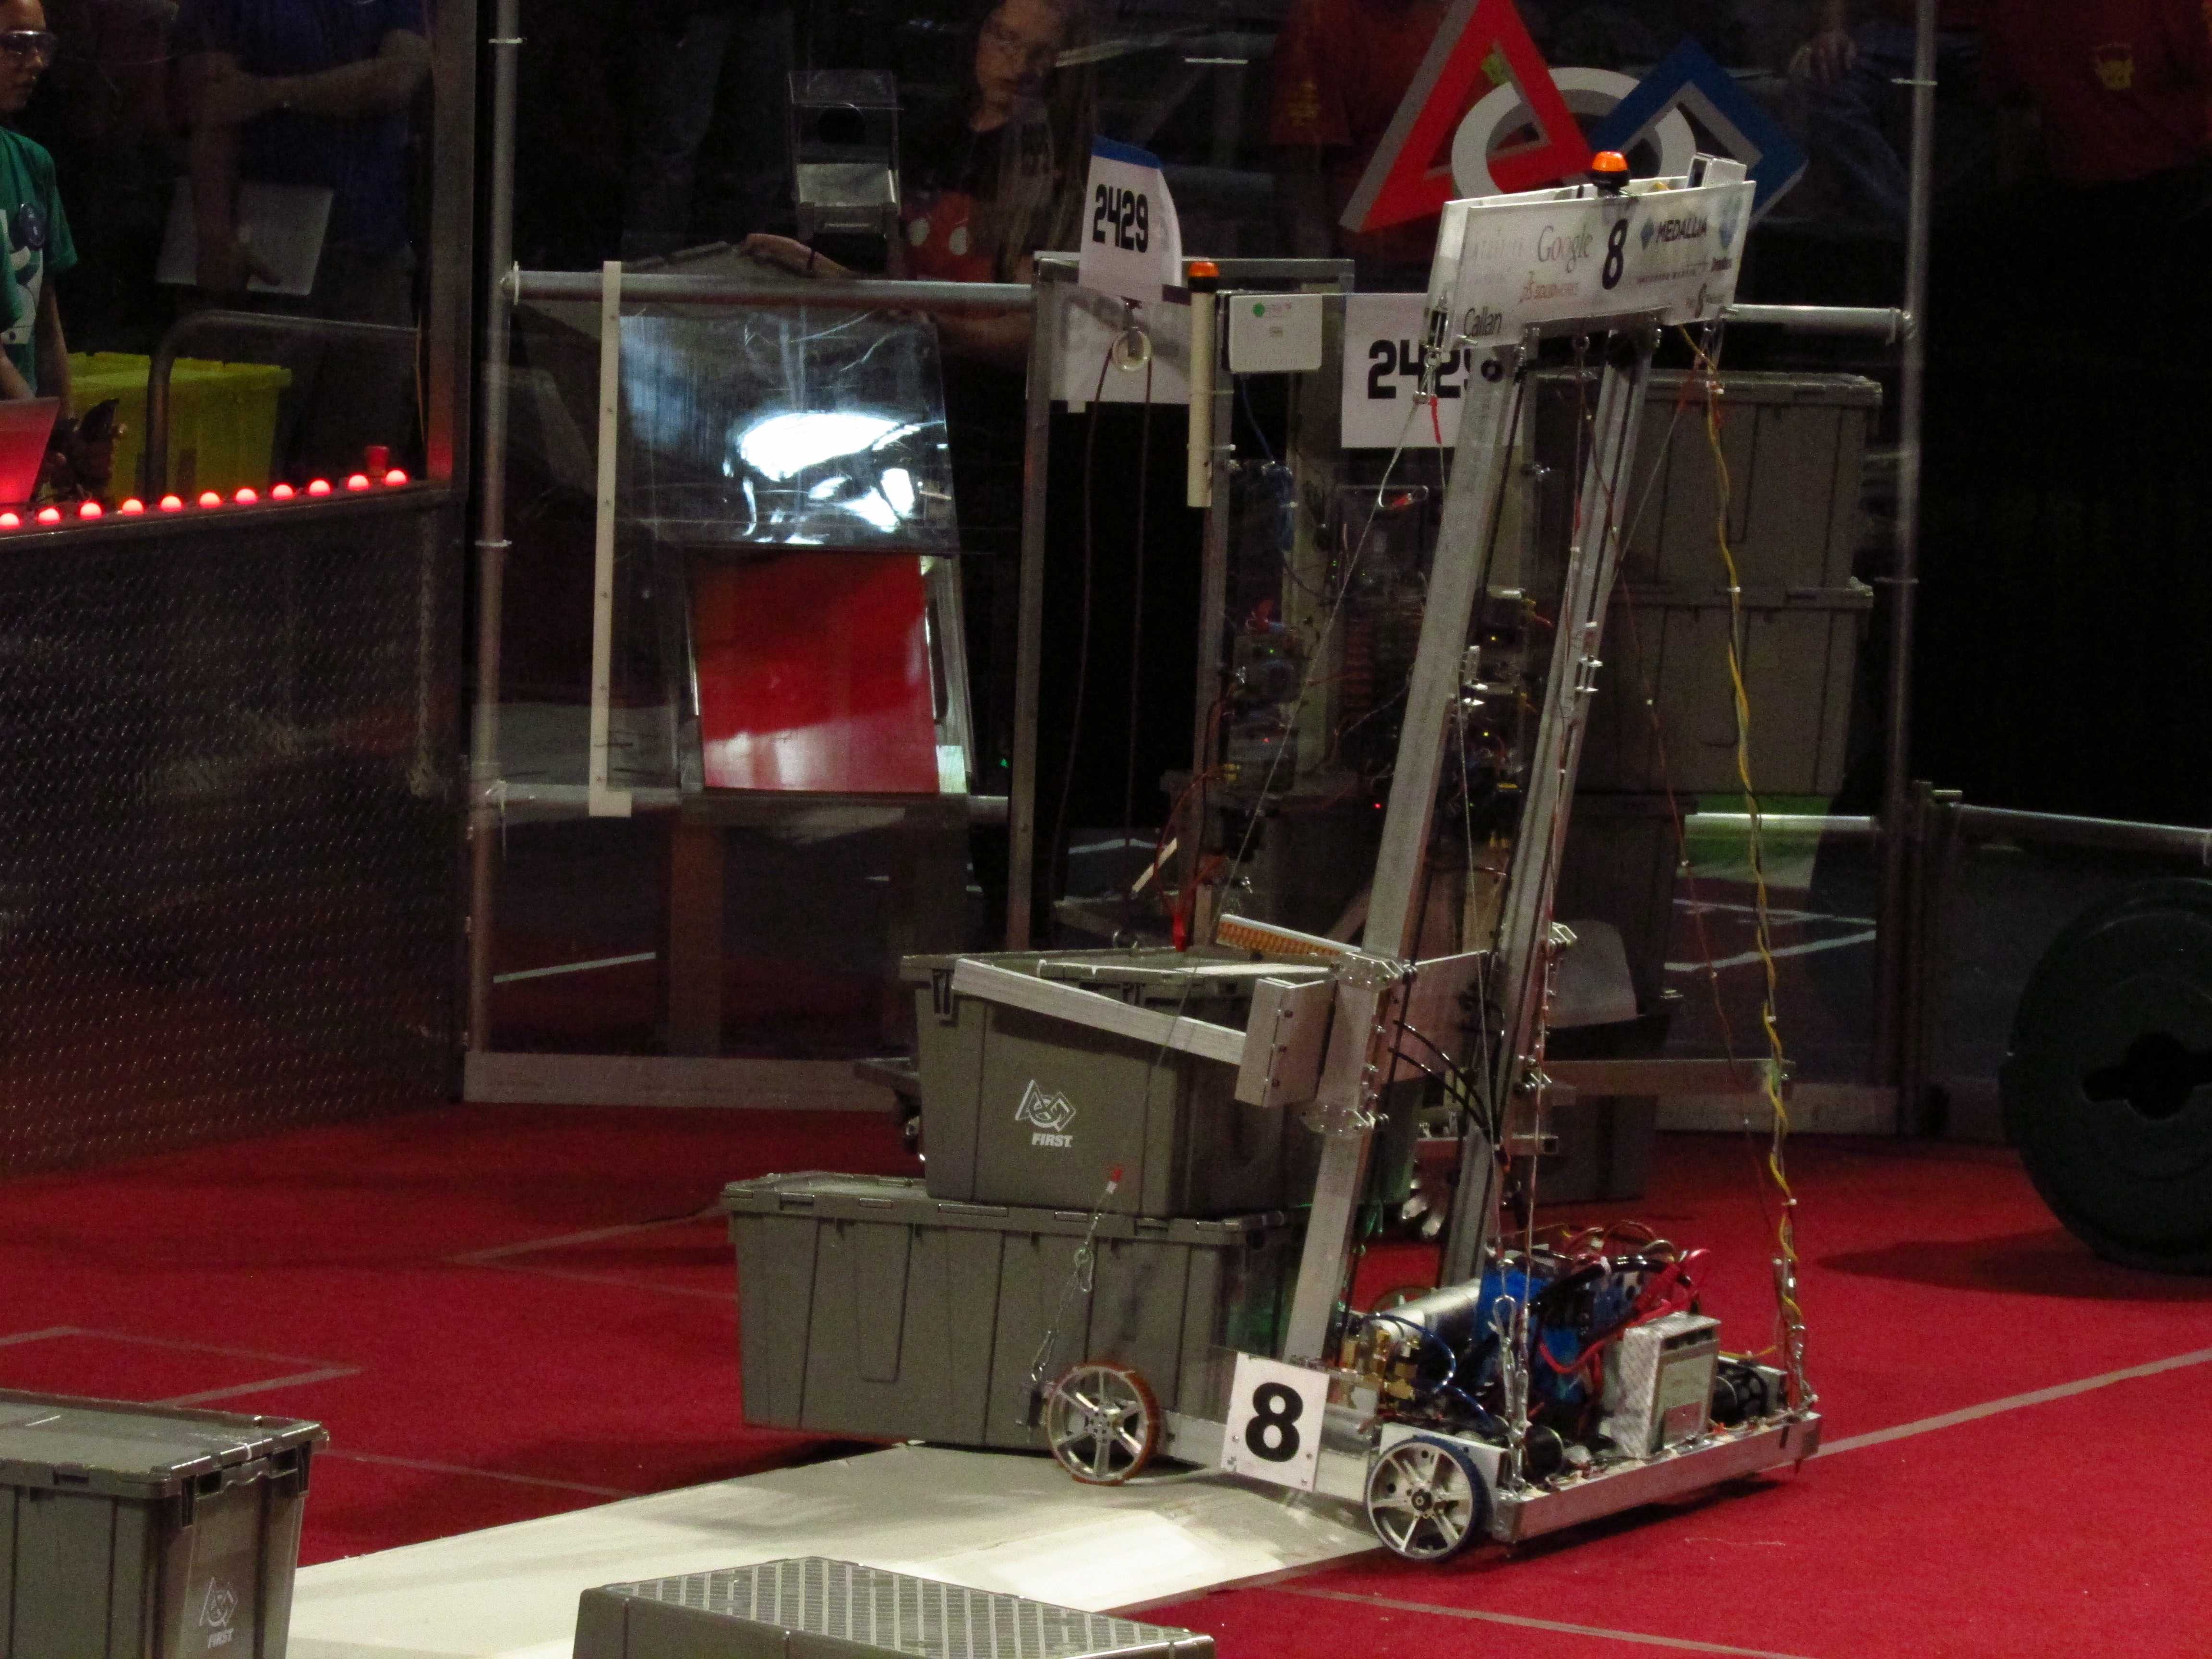 The Palo Alto High School Robotics  team debuted their robot at the Central Valley Regional robotics competition last weekend. The team competed against 49 Bay Area high school teams and was awarded the entrepreneurship award. Photo by Vivian Yang